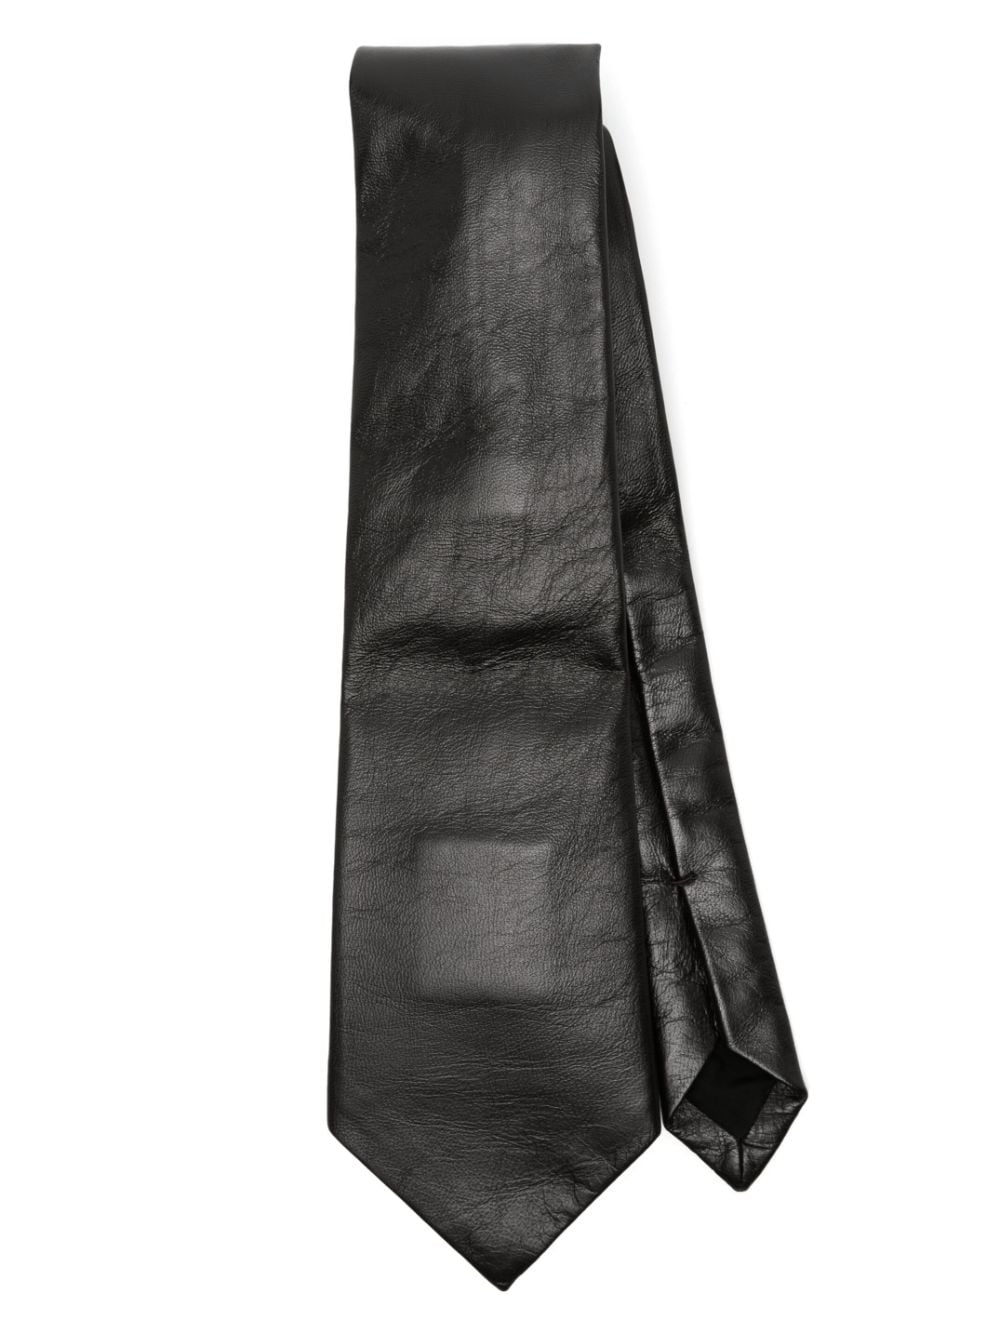 grained leather tie